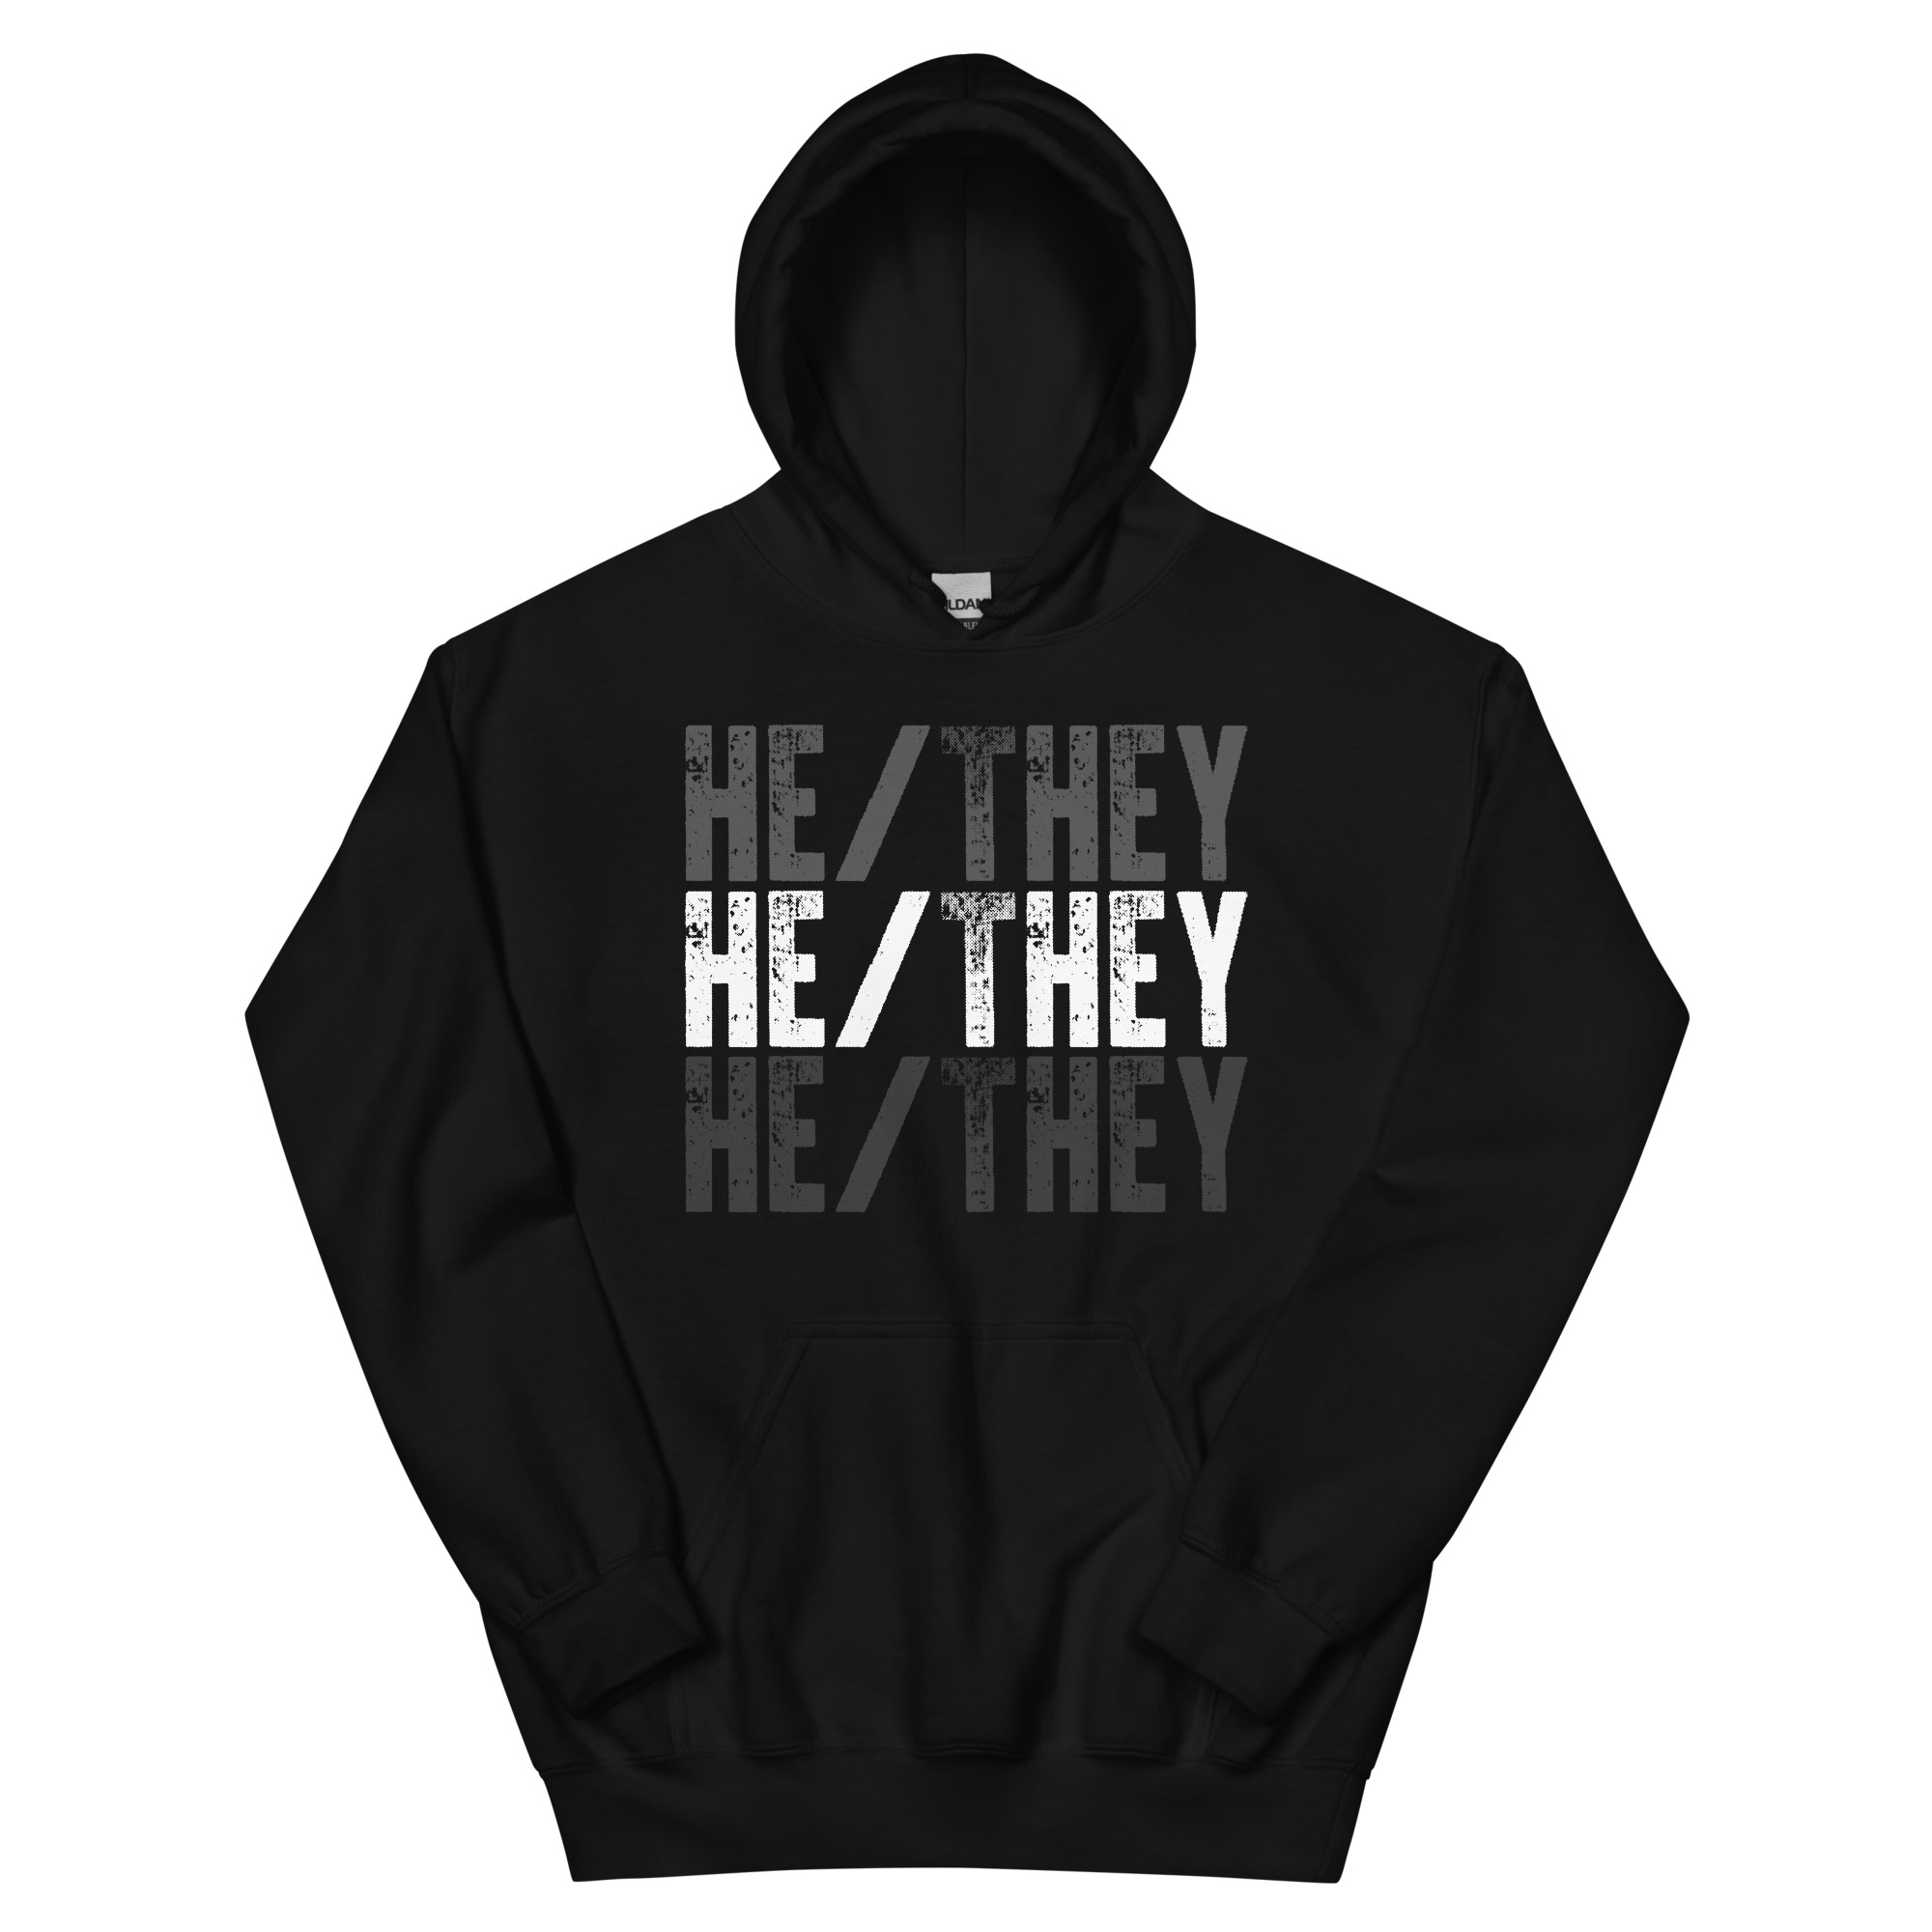 Featured image for “HE / THEY – Unisex Gildan Hoodie”